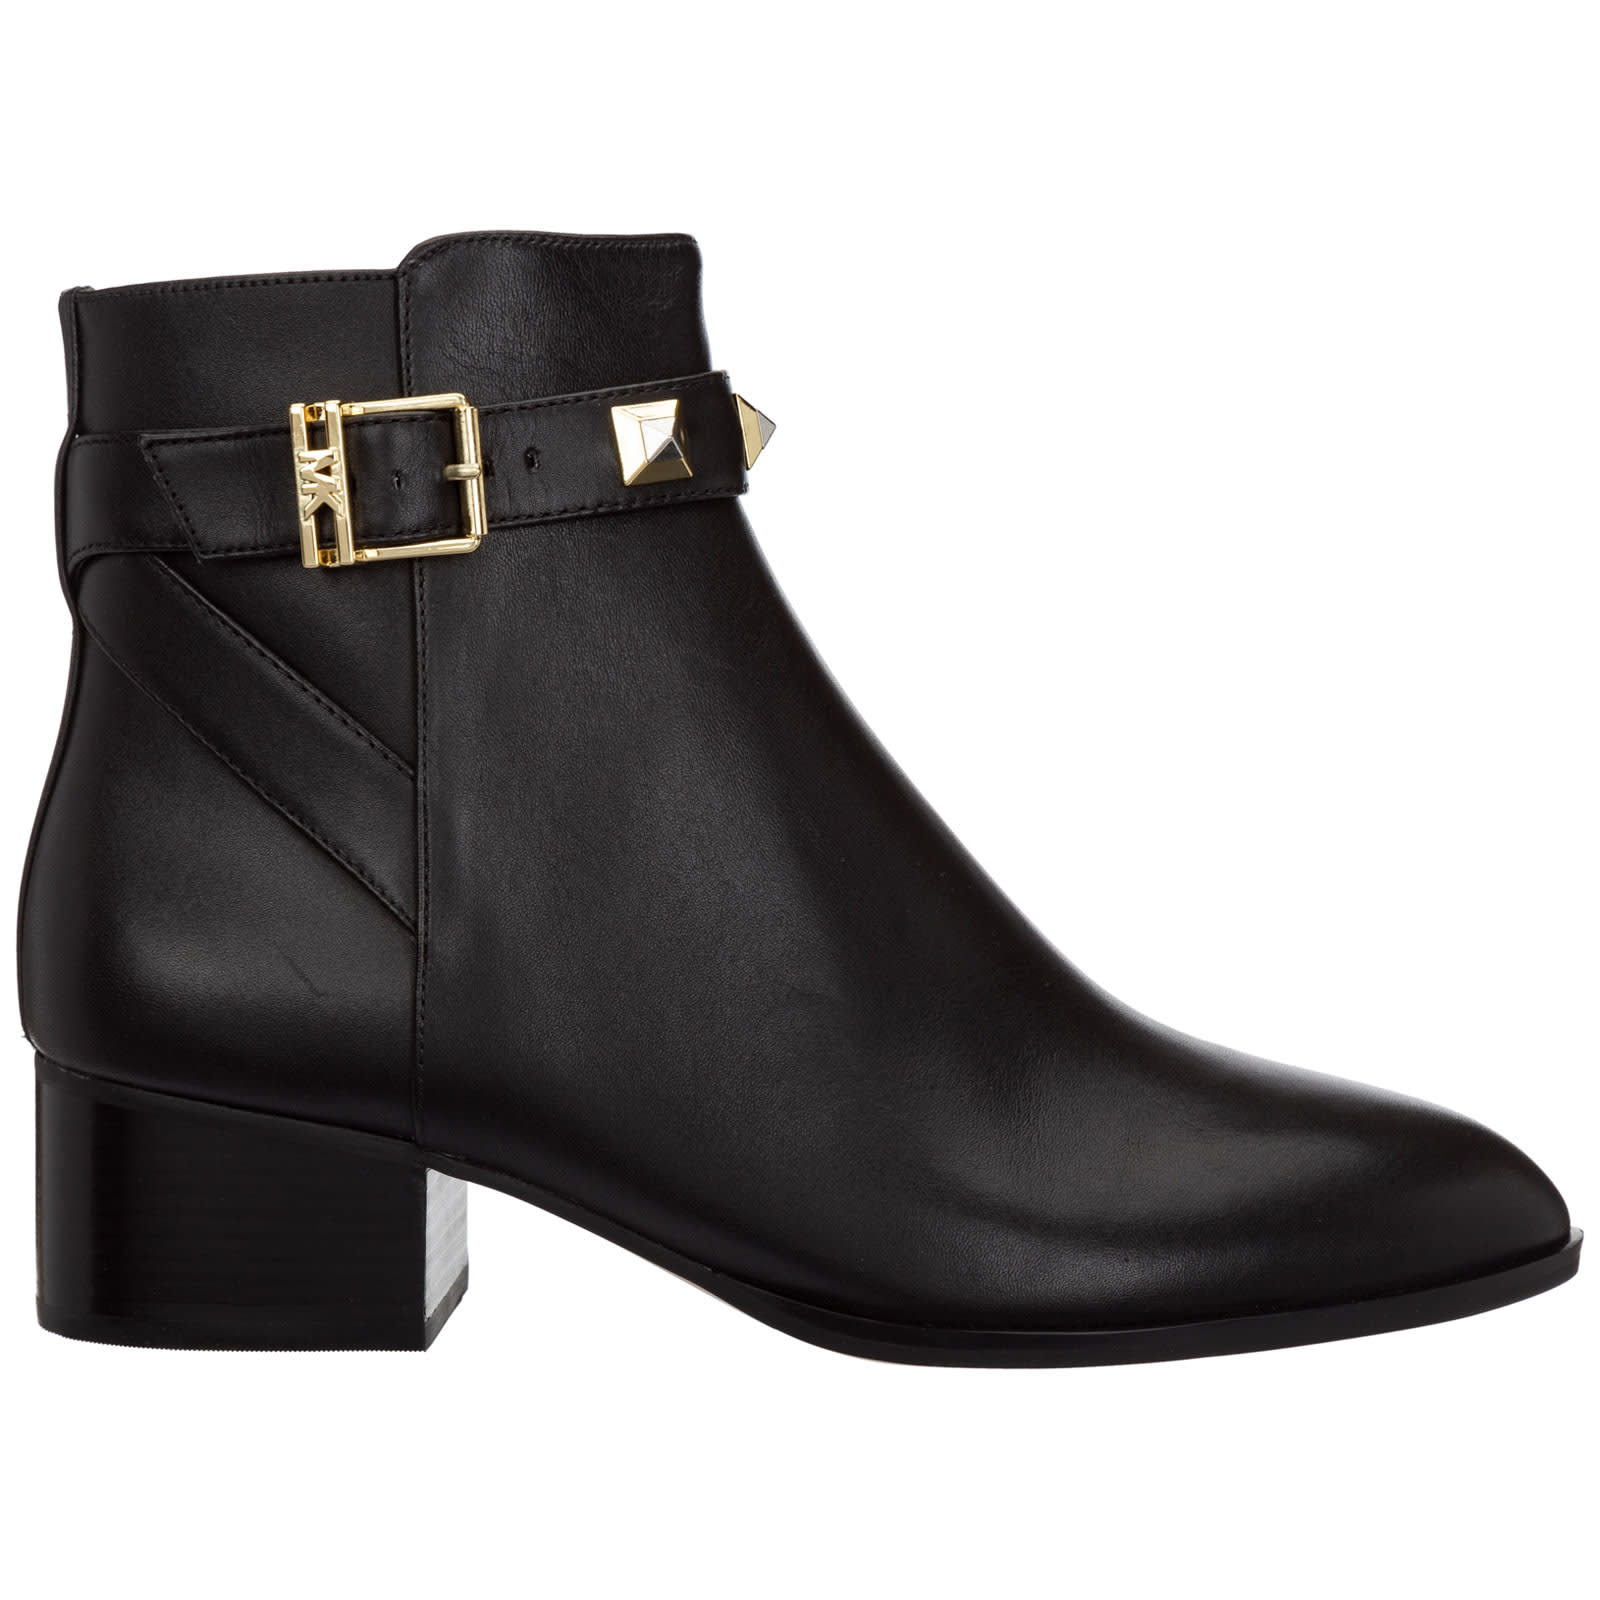 Michael Kors Britton Heeled Ankle Boots